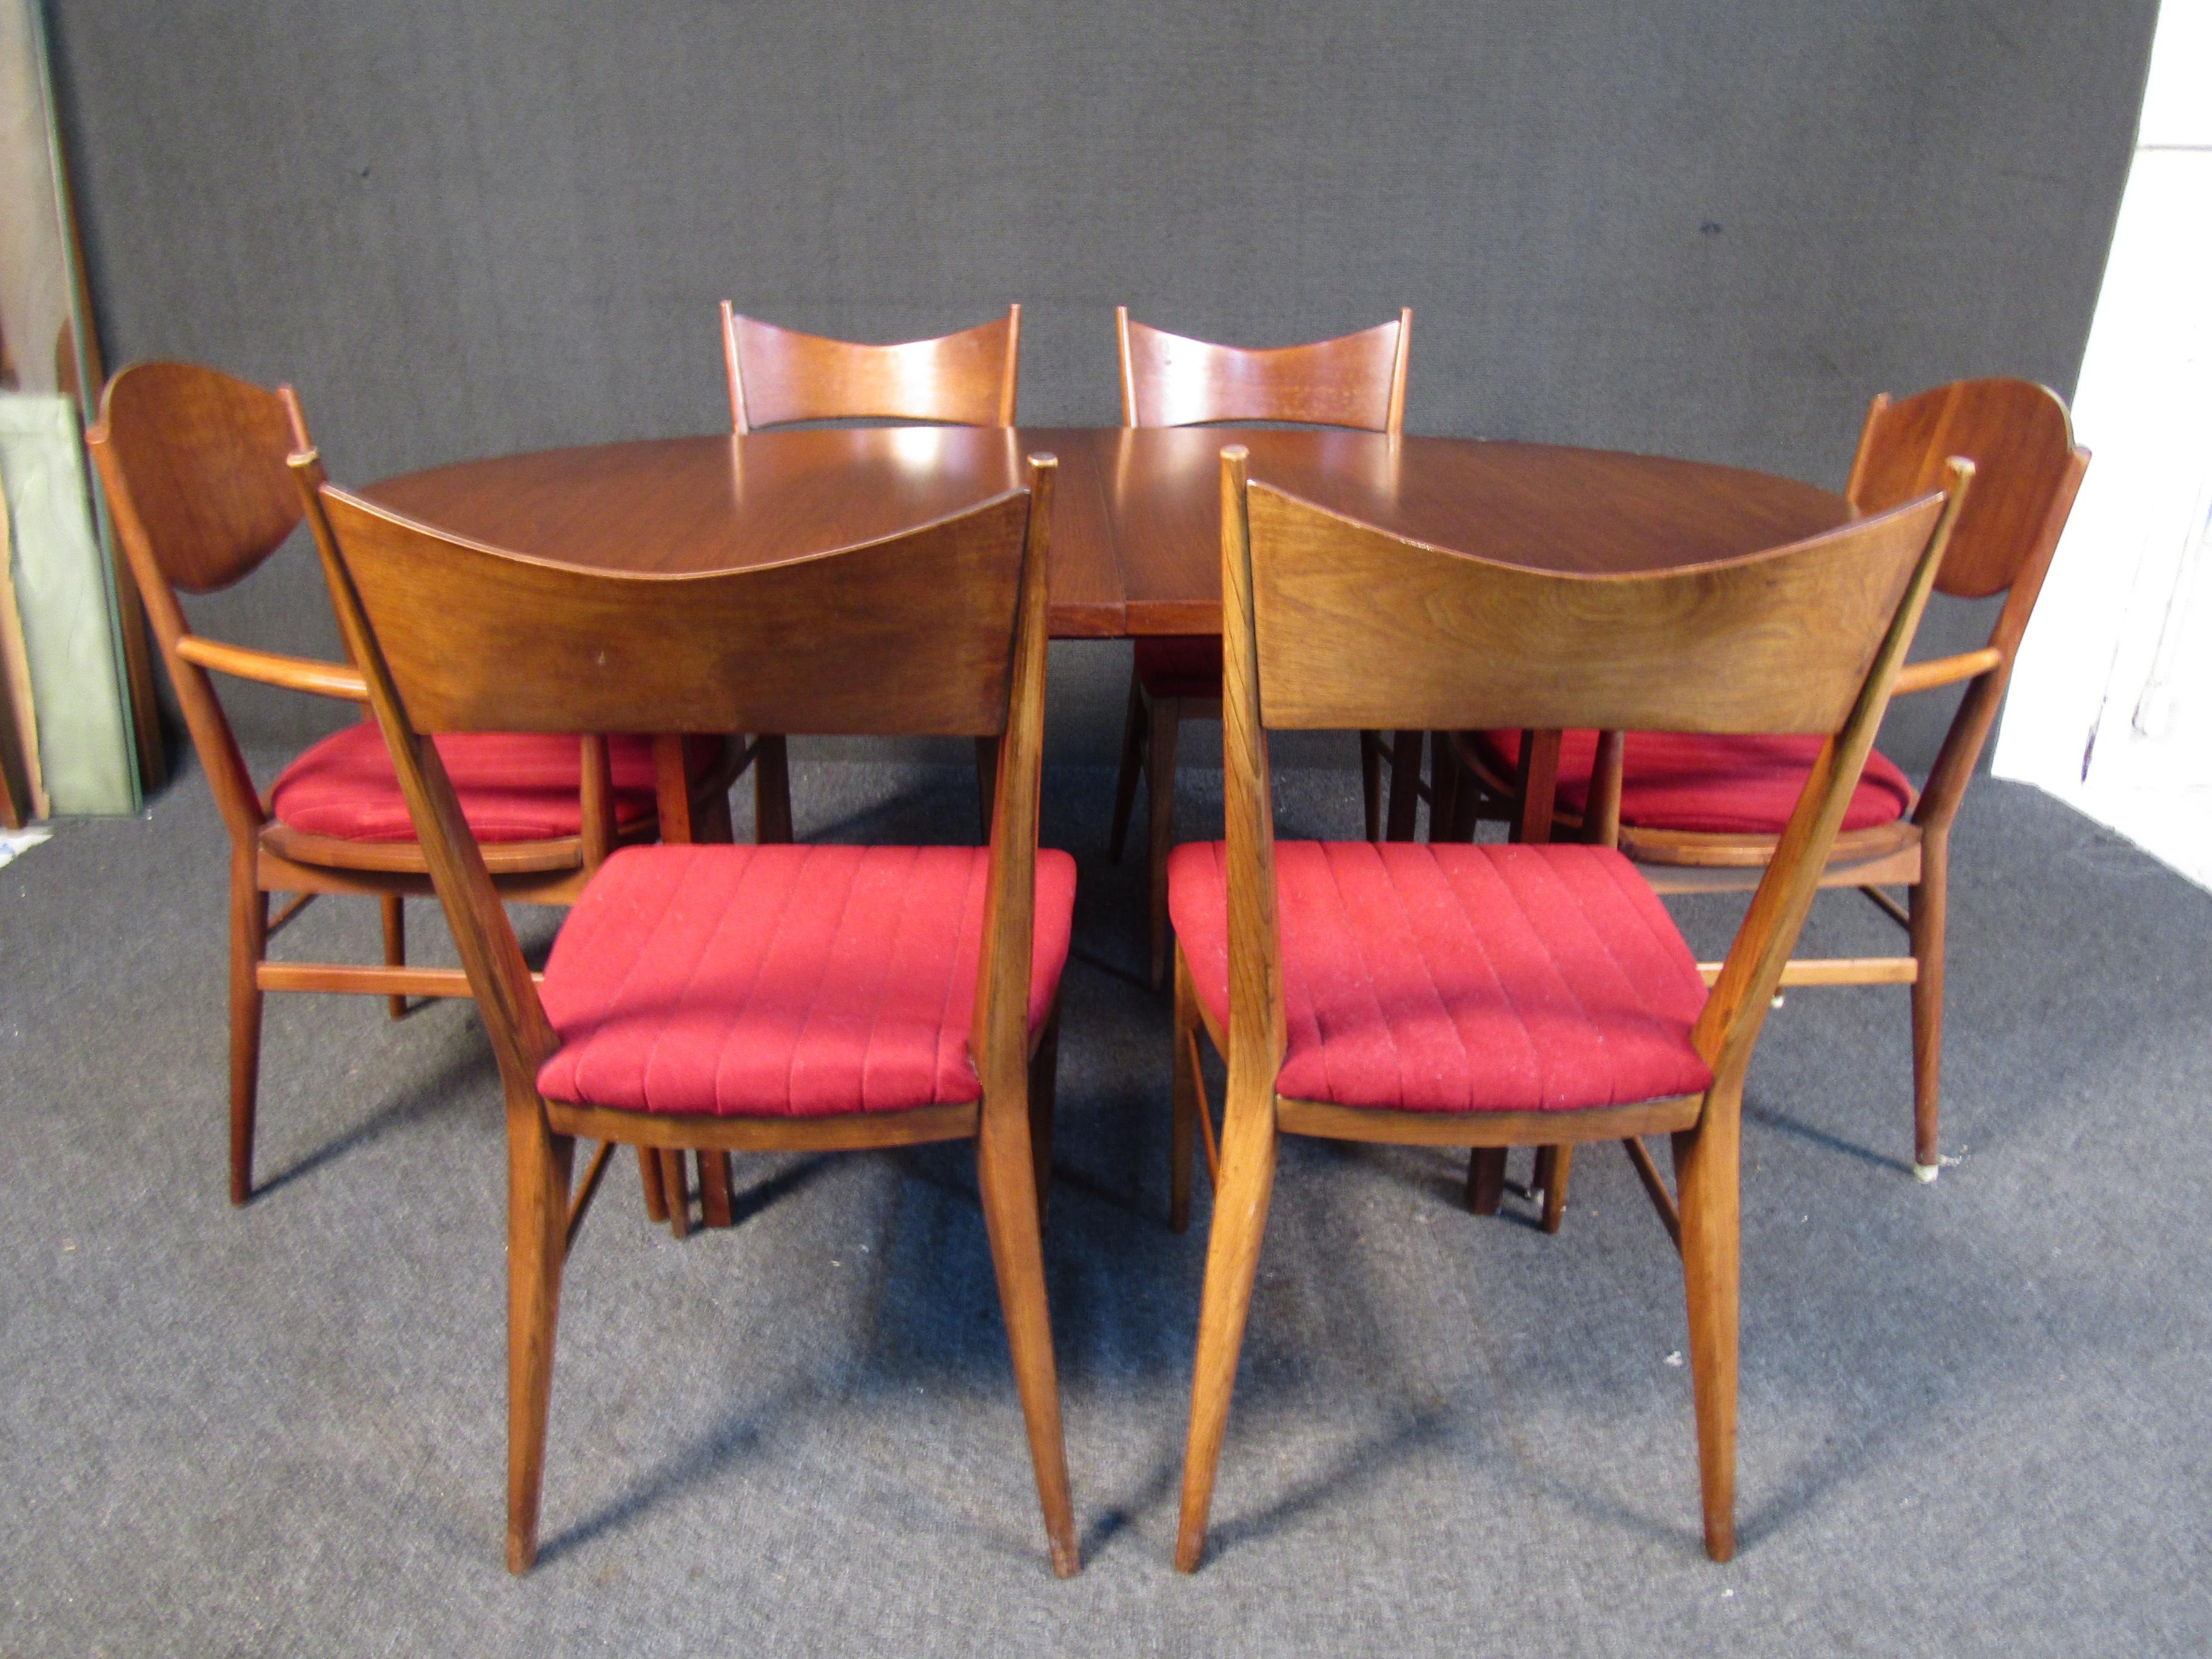 Upholstery Server and Dining Room Set by Paul McCobb For Sale